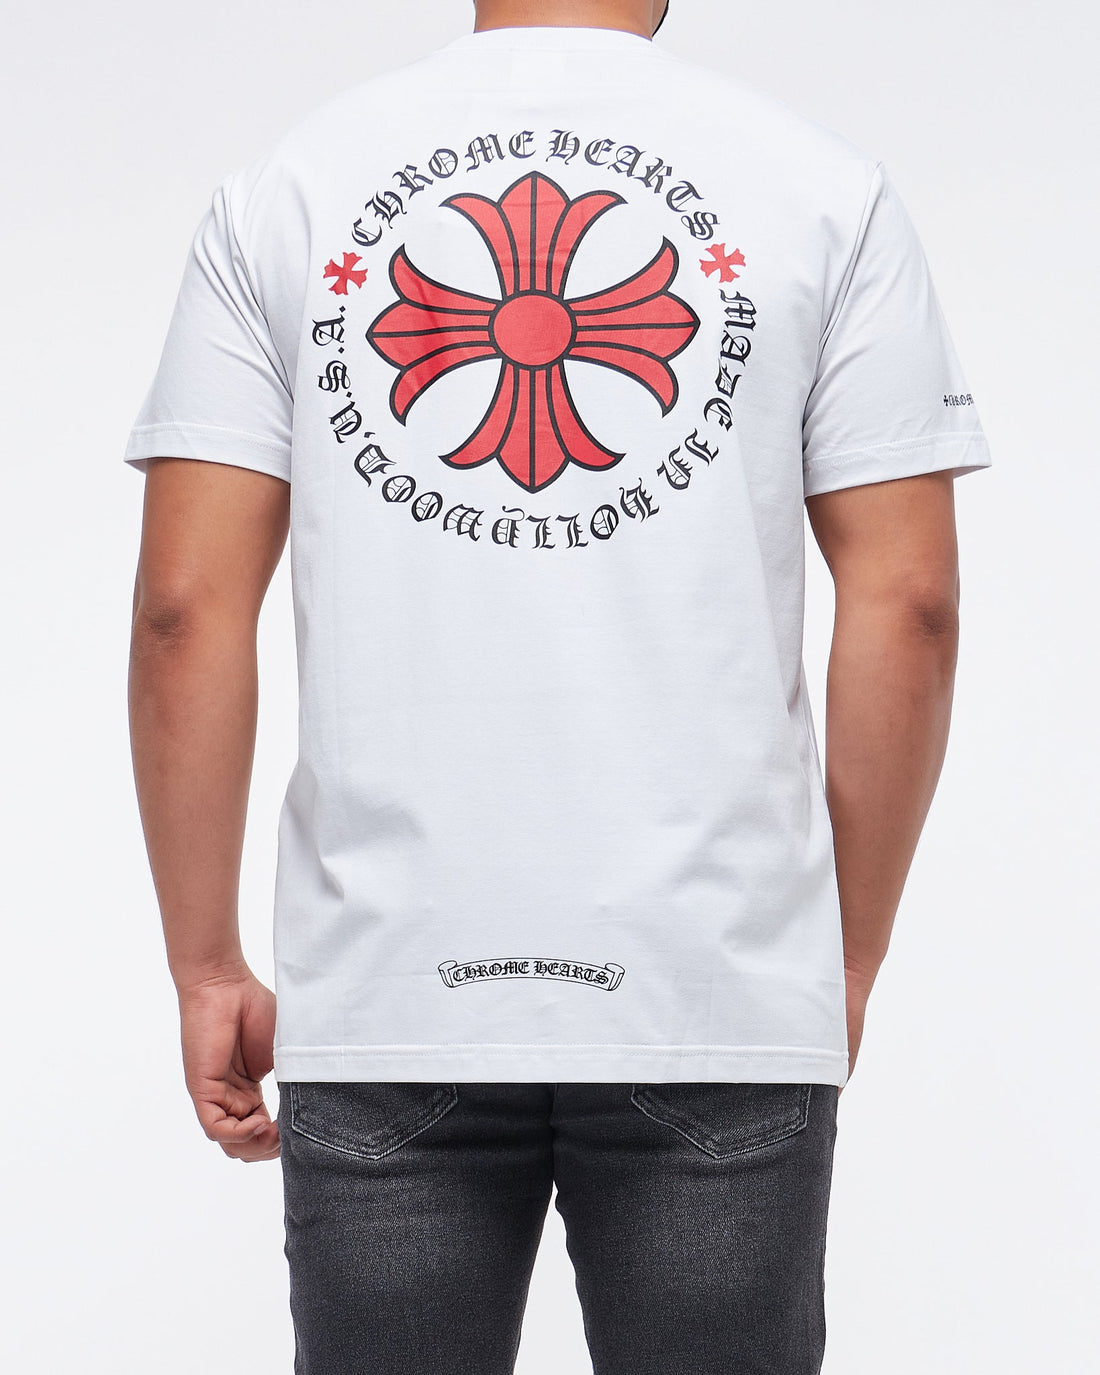 MOI OUTFIT-Red Cross Back Printed Men T-Shirt 15.90